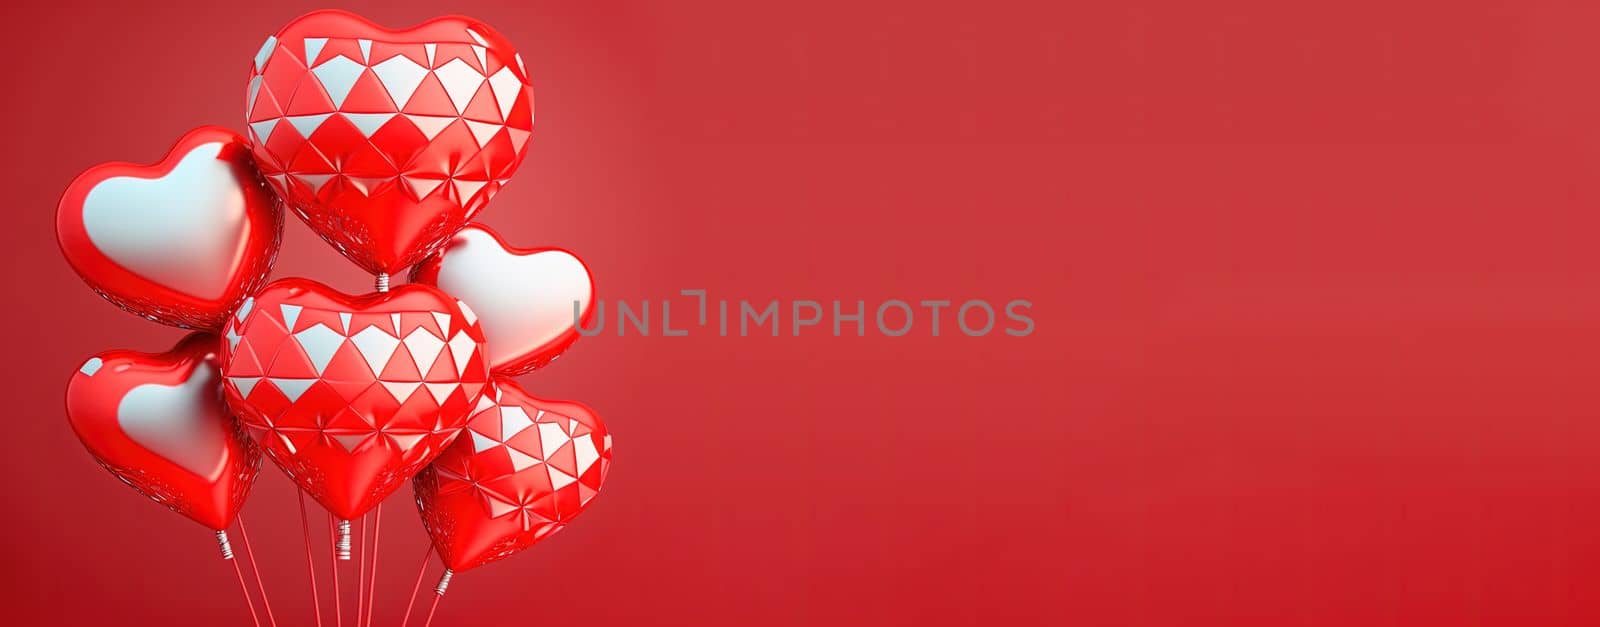 Bright red 3D heart shape on a happy Valentine's Day banner background by templator